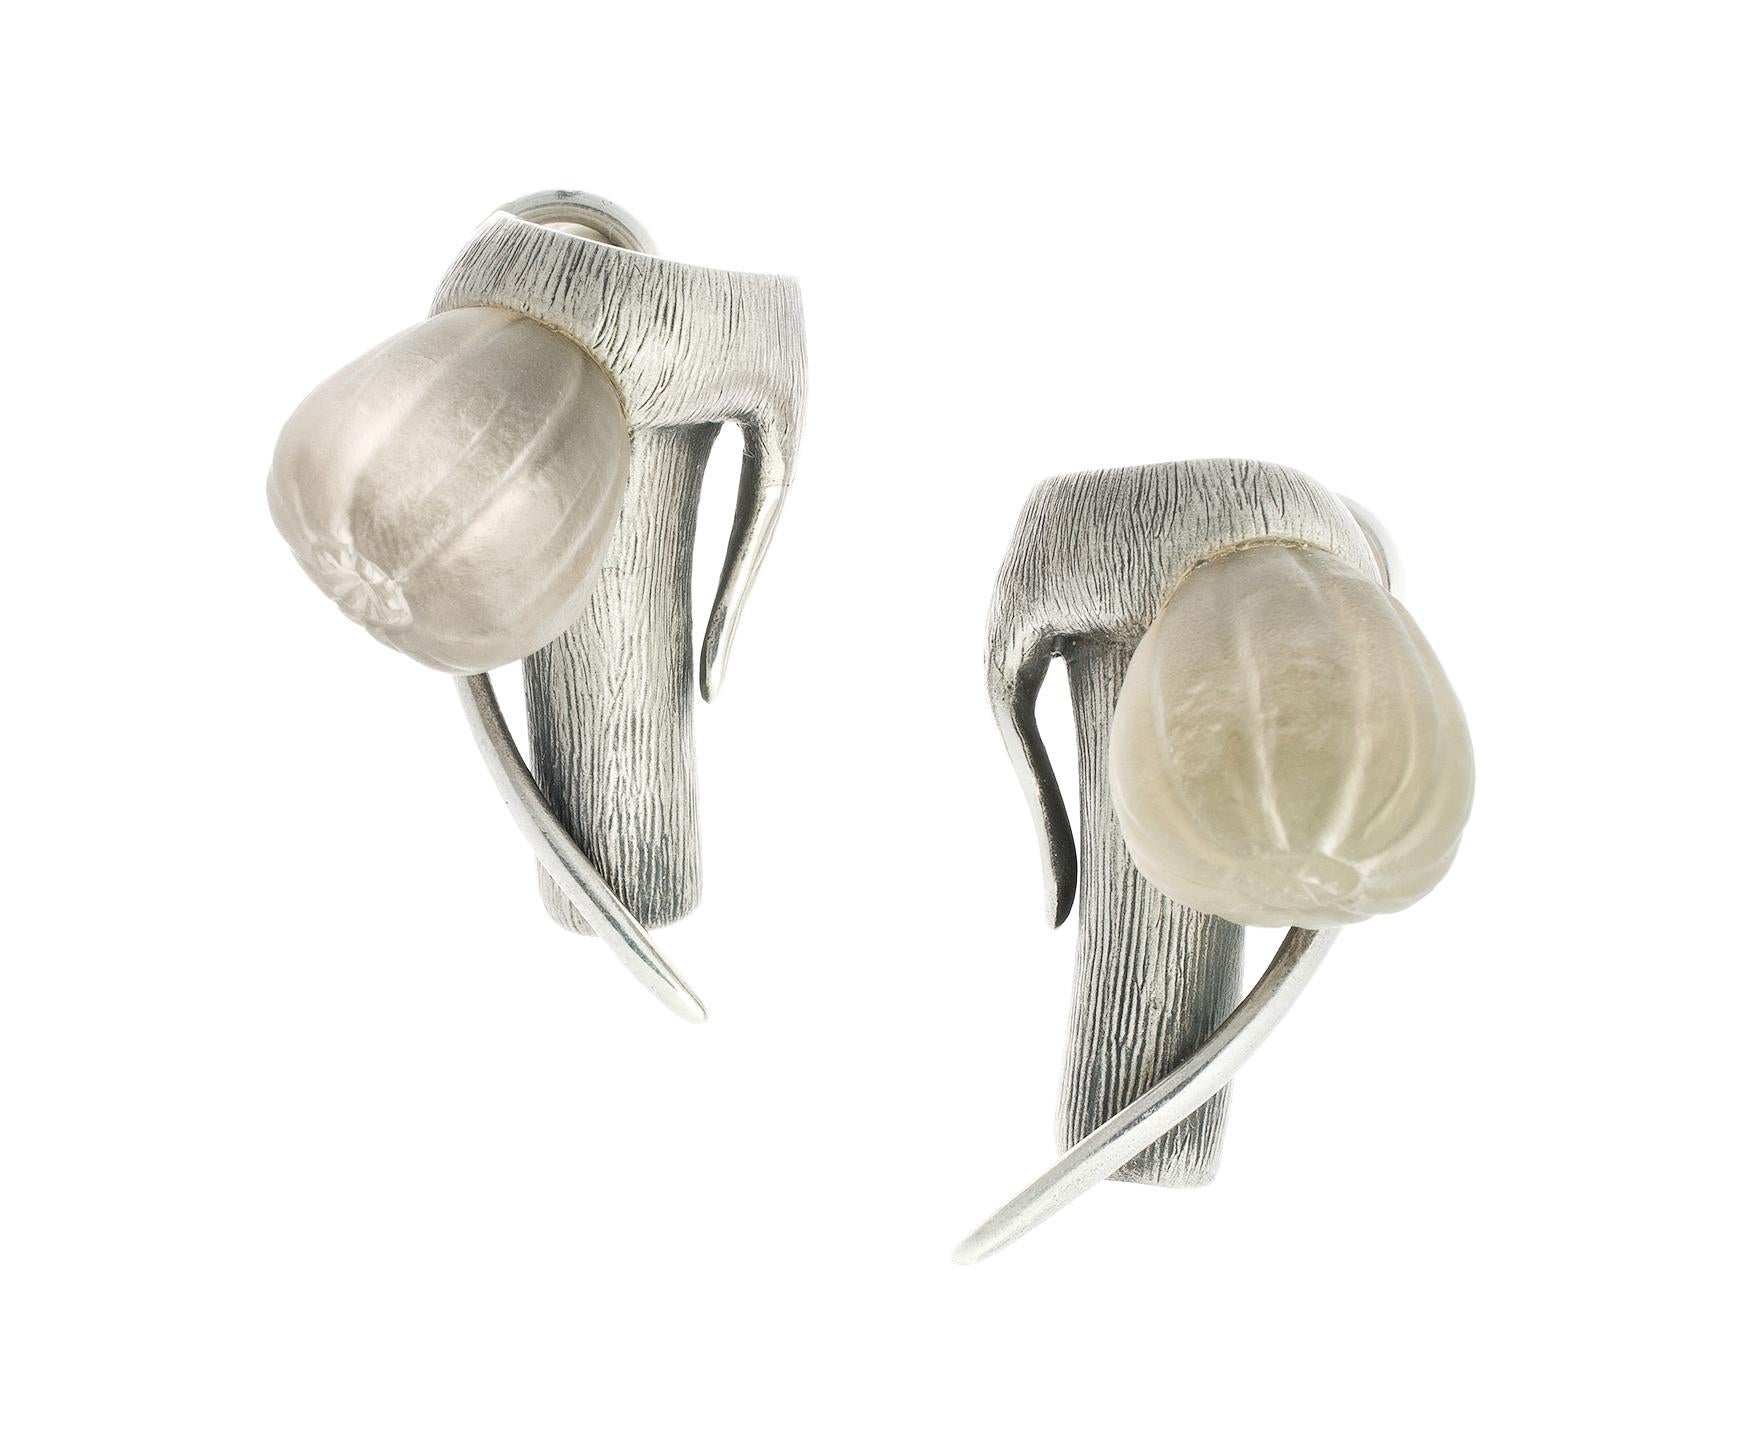 Fig Garden Stud Earrings in Silver with Quartzes by the Artist For Sale 1